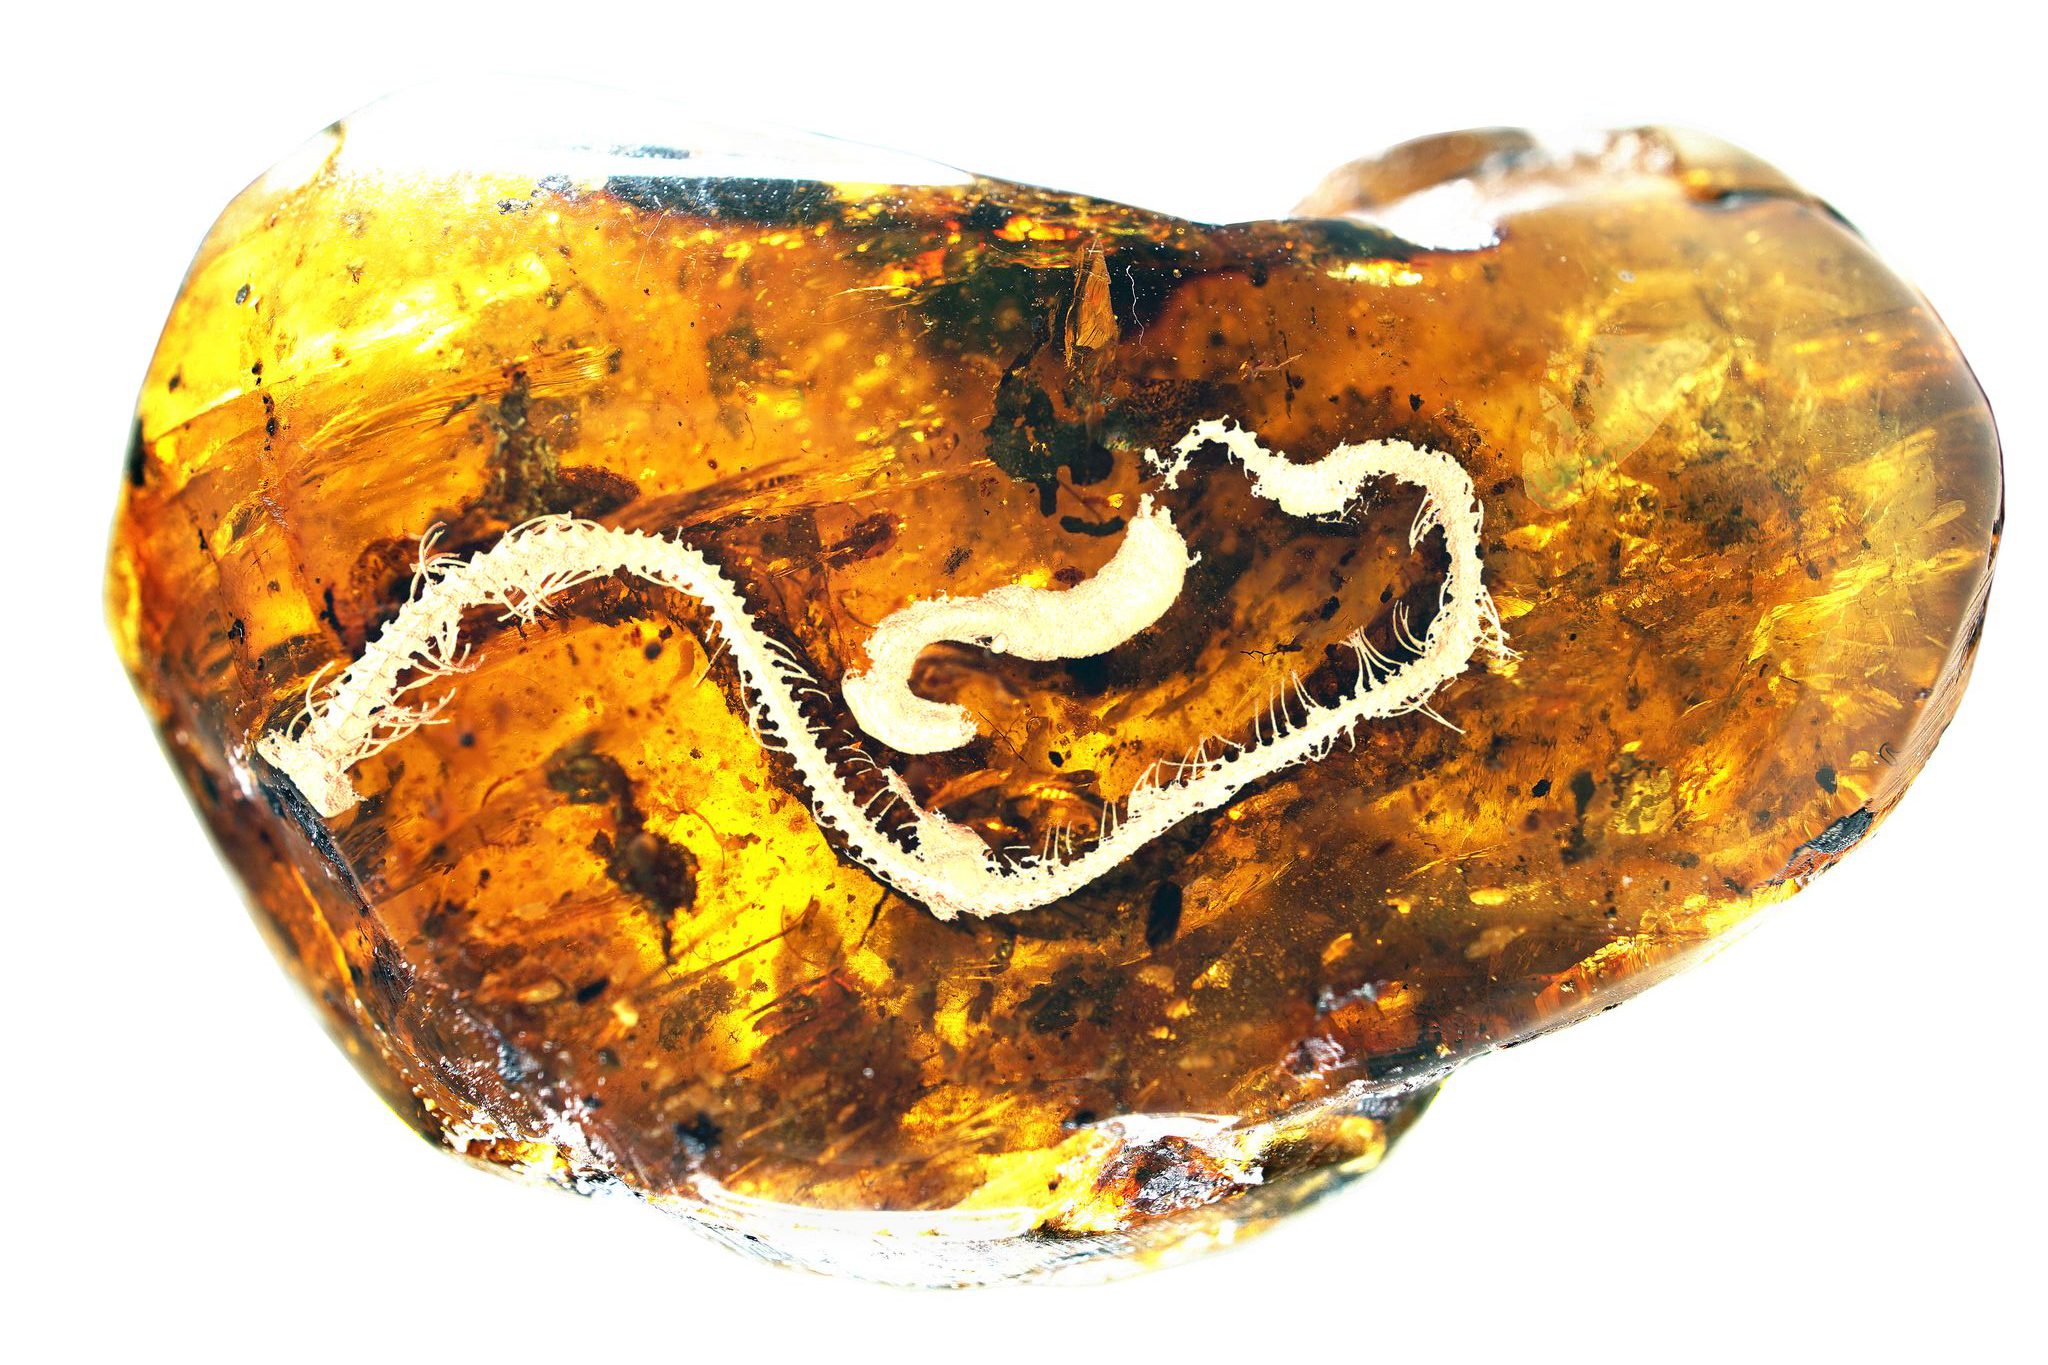 Delicate fossil of baby snake from dinosaur era found encased in amber |  